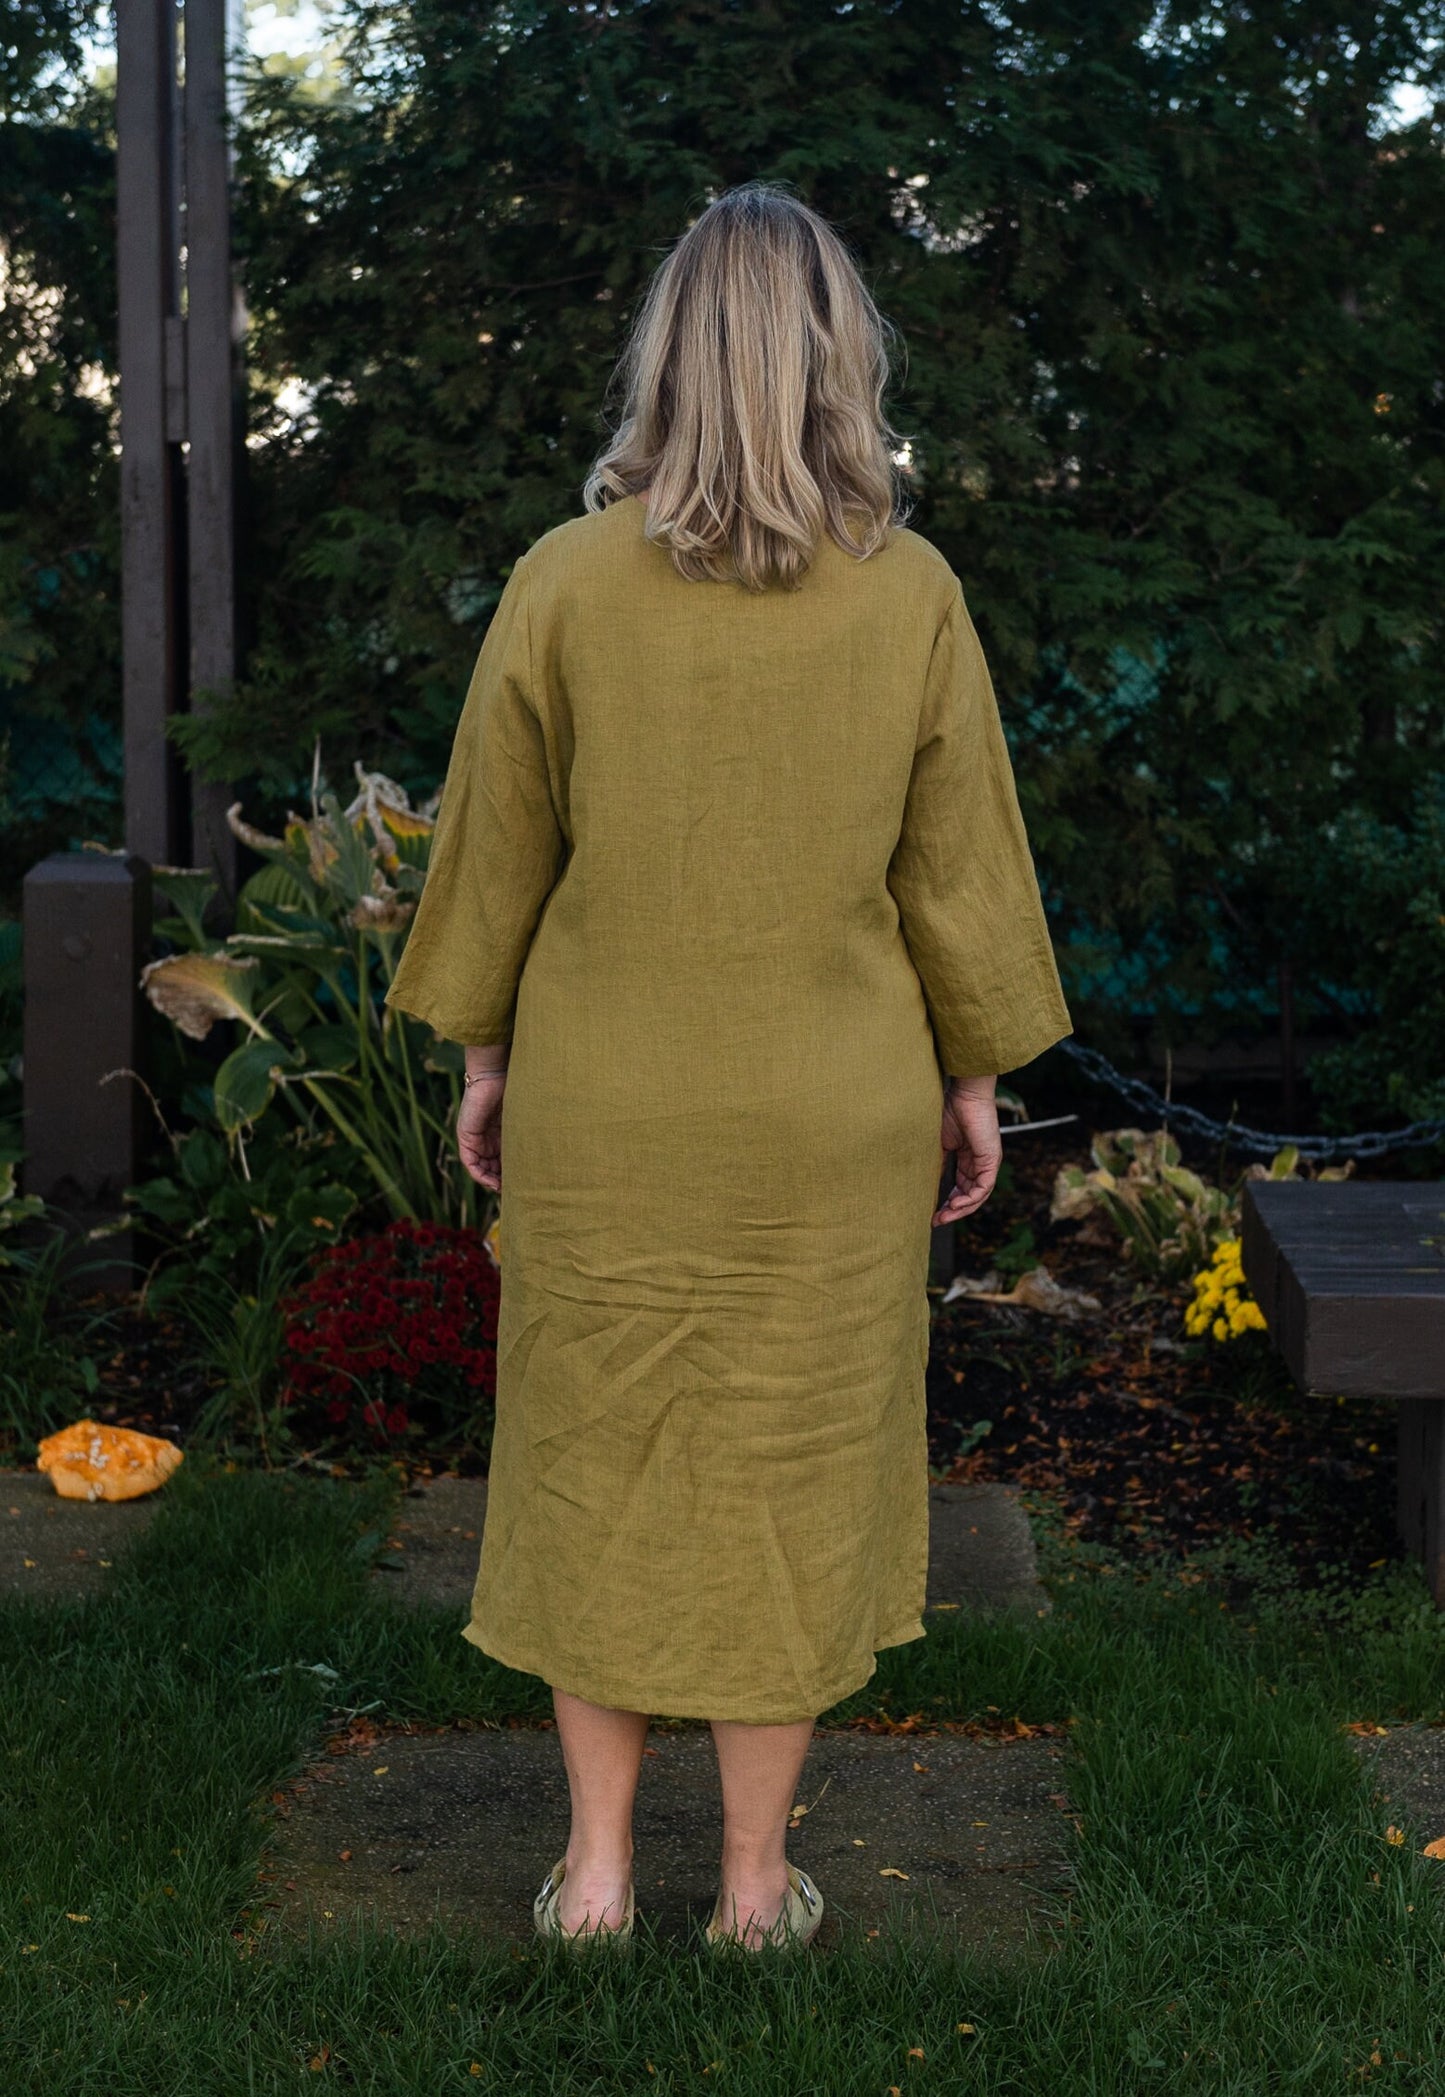 Mustard yellow linen caftan dress offering both style and lounge-worthy comfort.